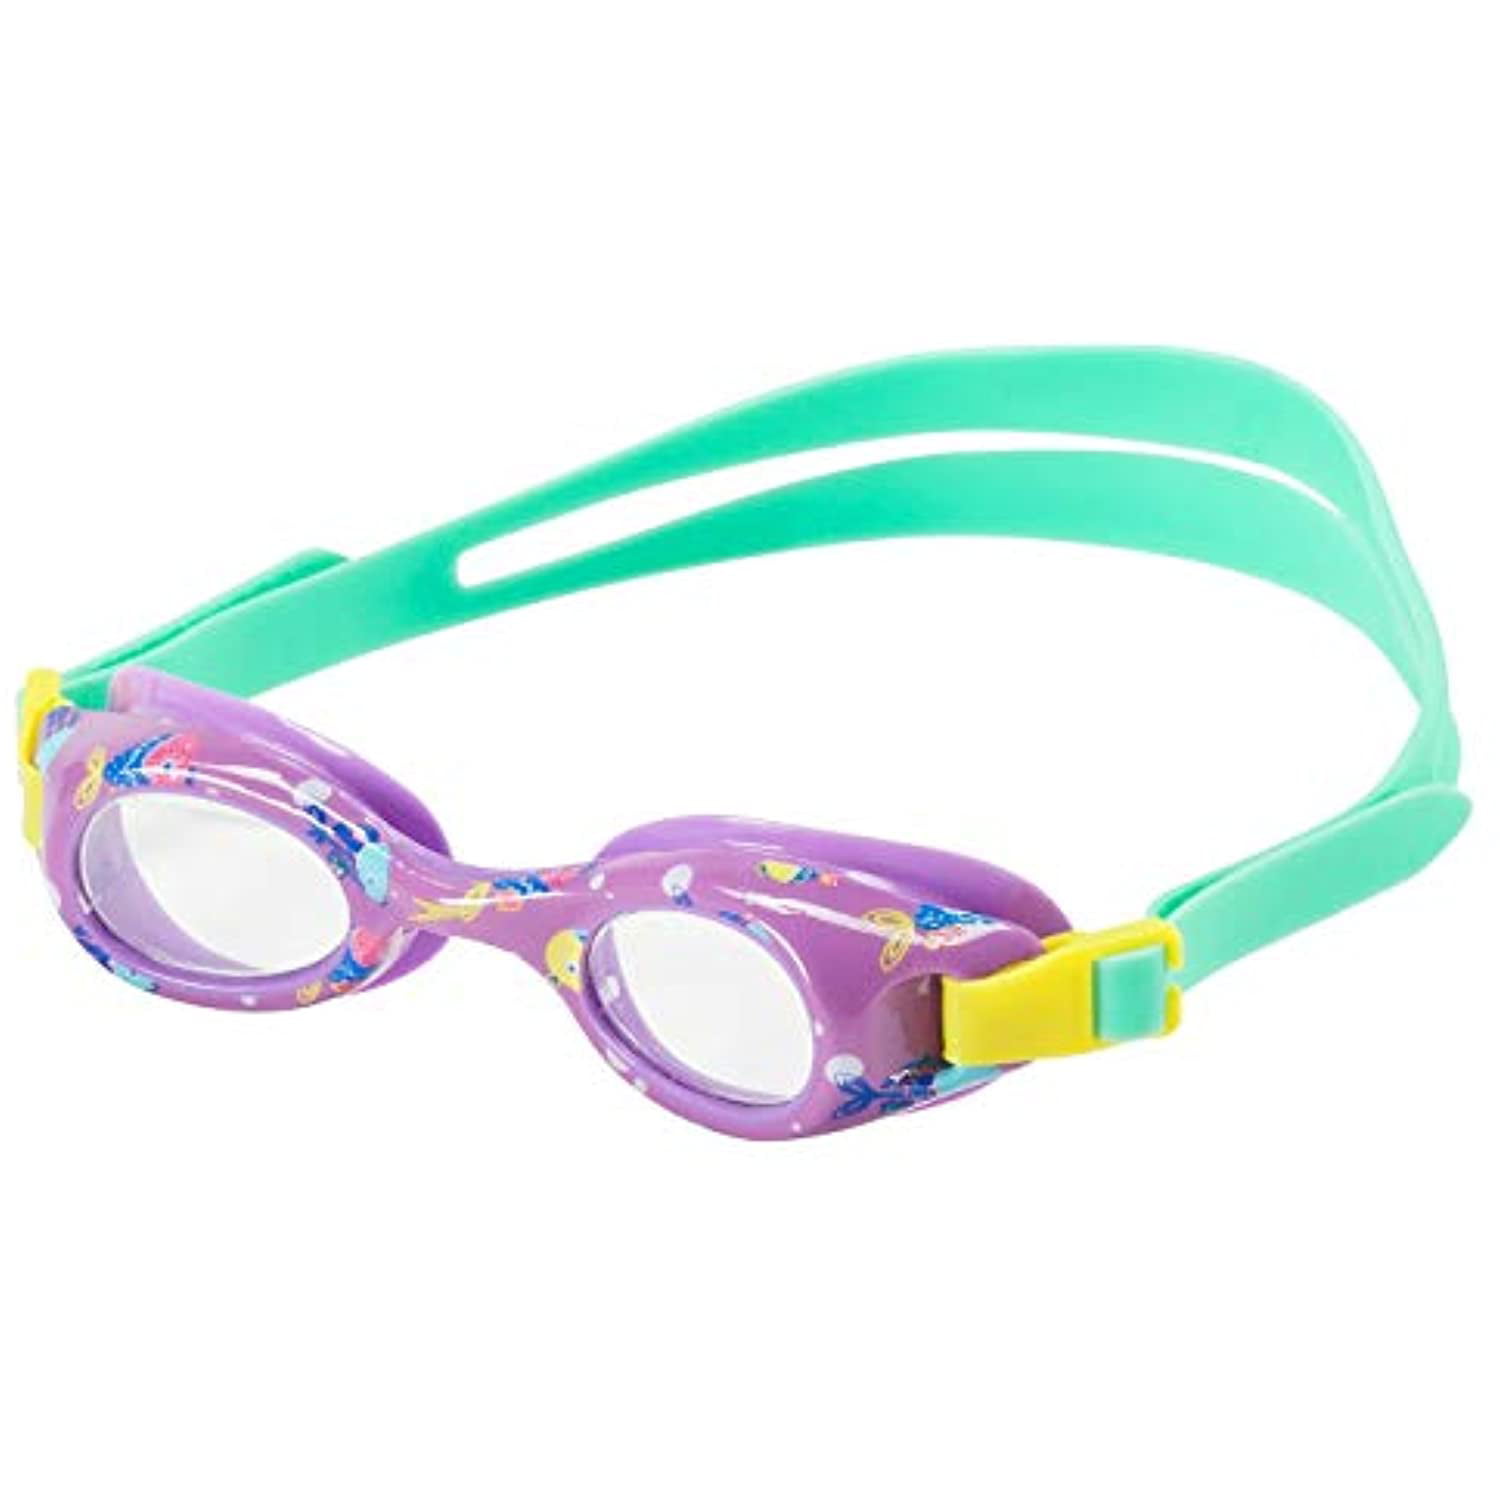 Speedo Goggles Kids Glide Print Ages 3-8 Flex Fit UV Protection Green Dino G1 for sale online 